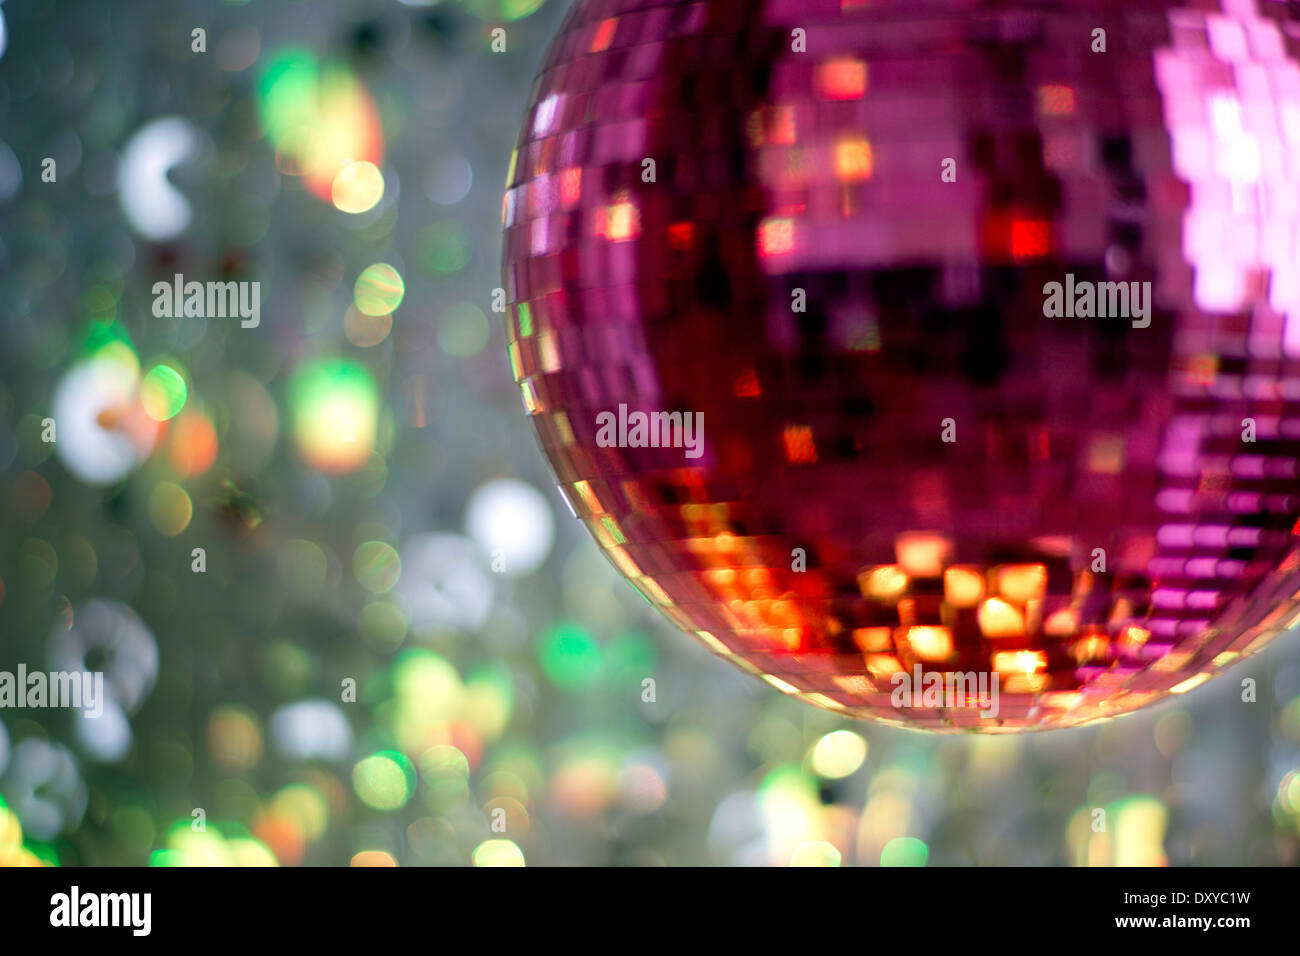 pink discoball with colured background Stock Photo